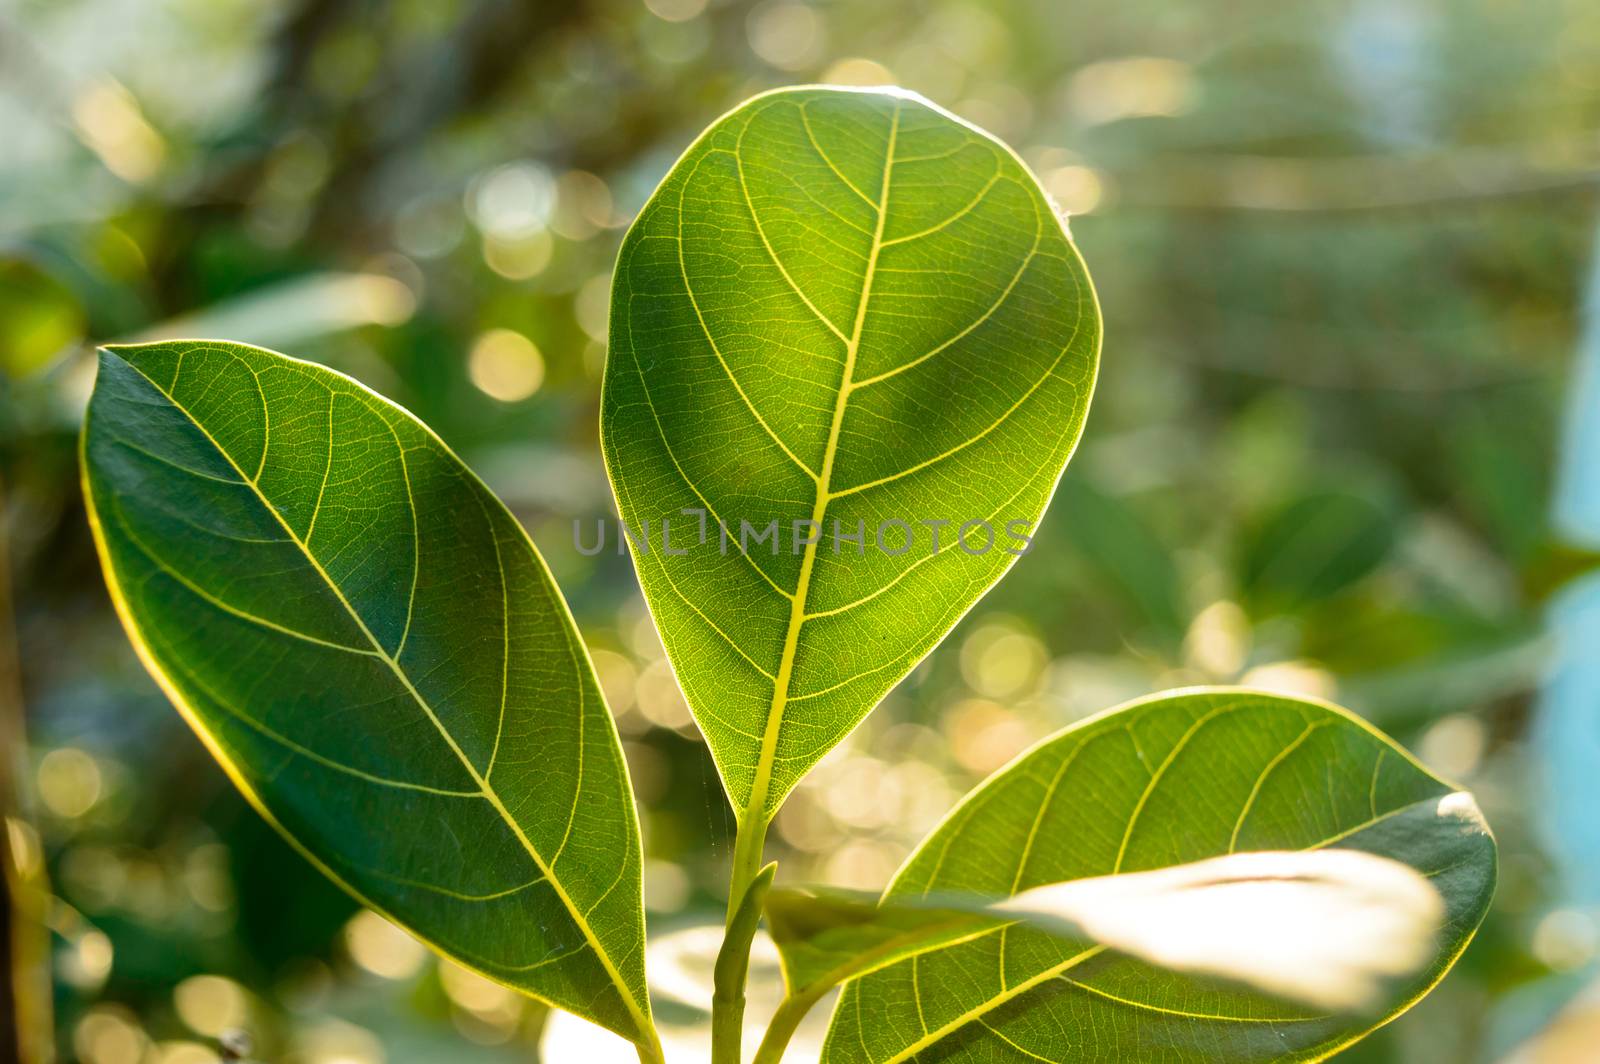 Green leaf absorbs morning sunlight. Leaves of a plant close-up with back-lit morning ray of light. Beauty in Nature background. Photosynthesis chlorophyll Botany Biology Concept.